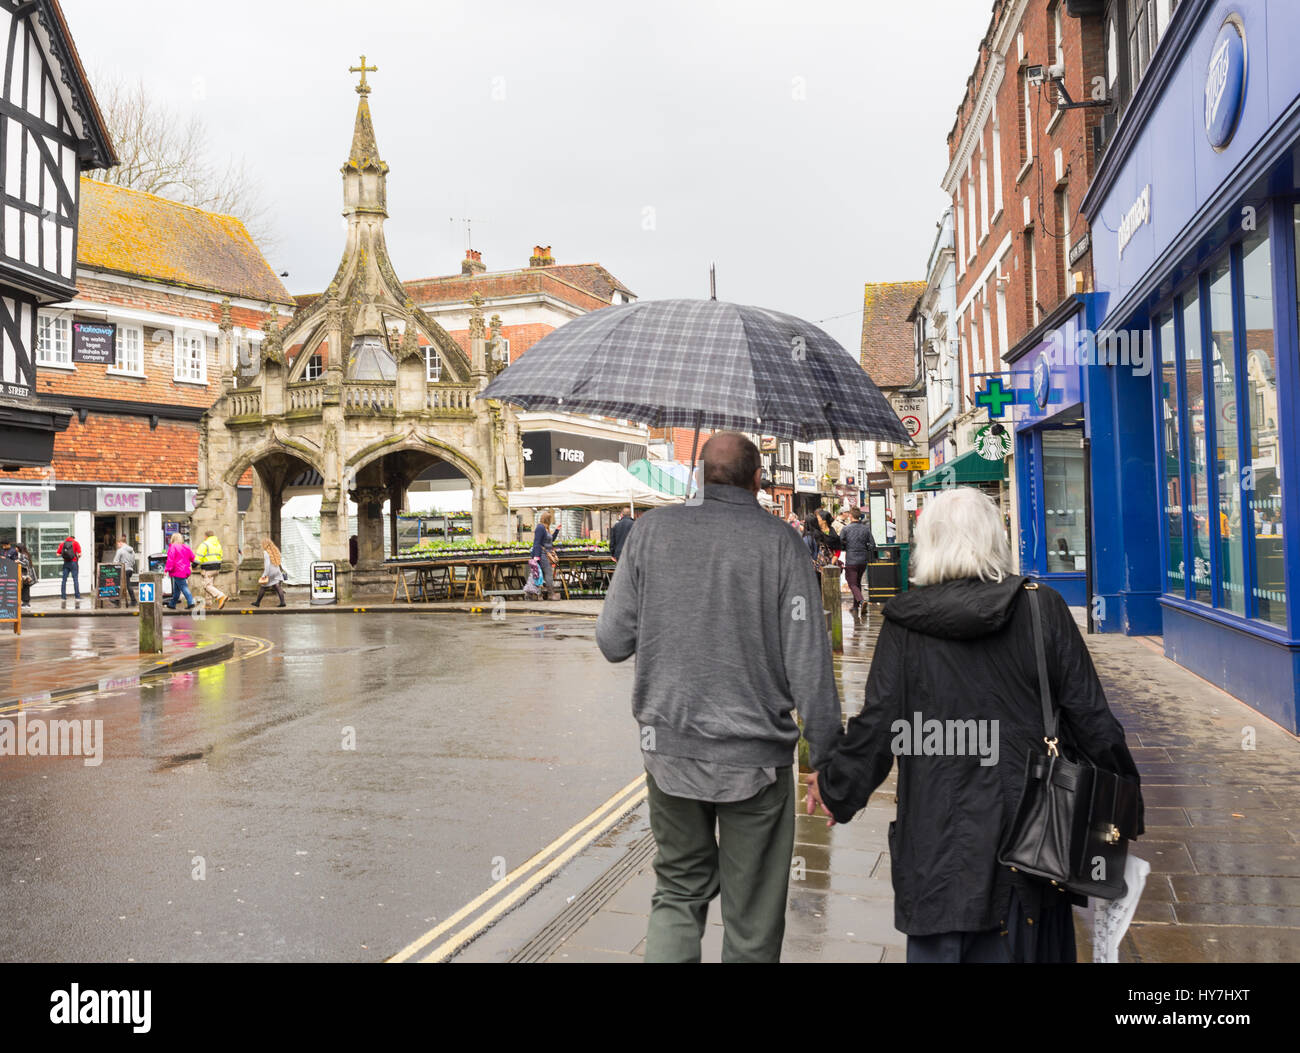 Elderly couple using an umbrella on Blue Boar Row near the Poultry Cross ancient monument, Salisbury, Wiltshire, UK. Mixed weather in the historic cathedral city with heavy April rain showers and sunshine on a spring afternoon. Stock Photo